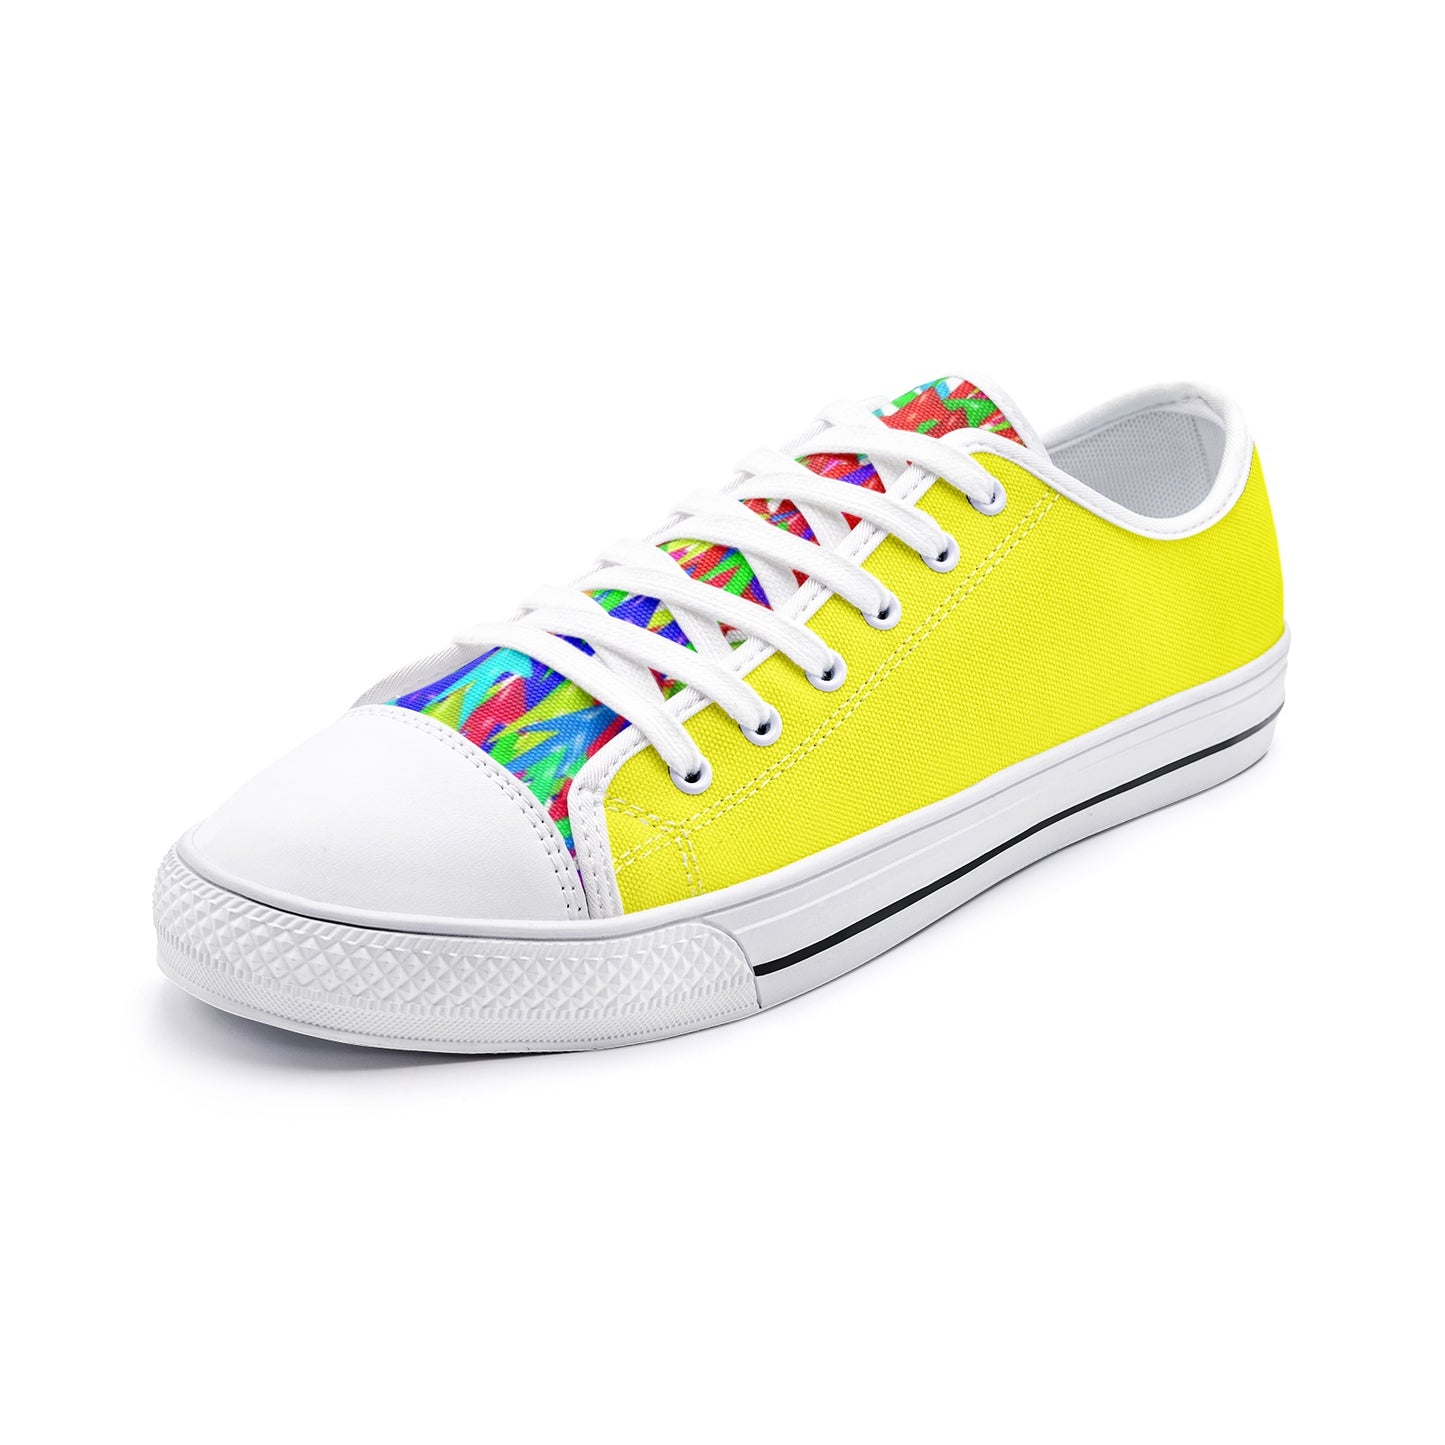 Unisex Low Top Canvas Shoes Printy6